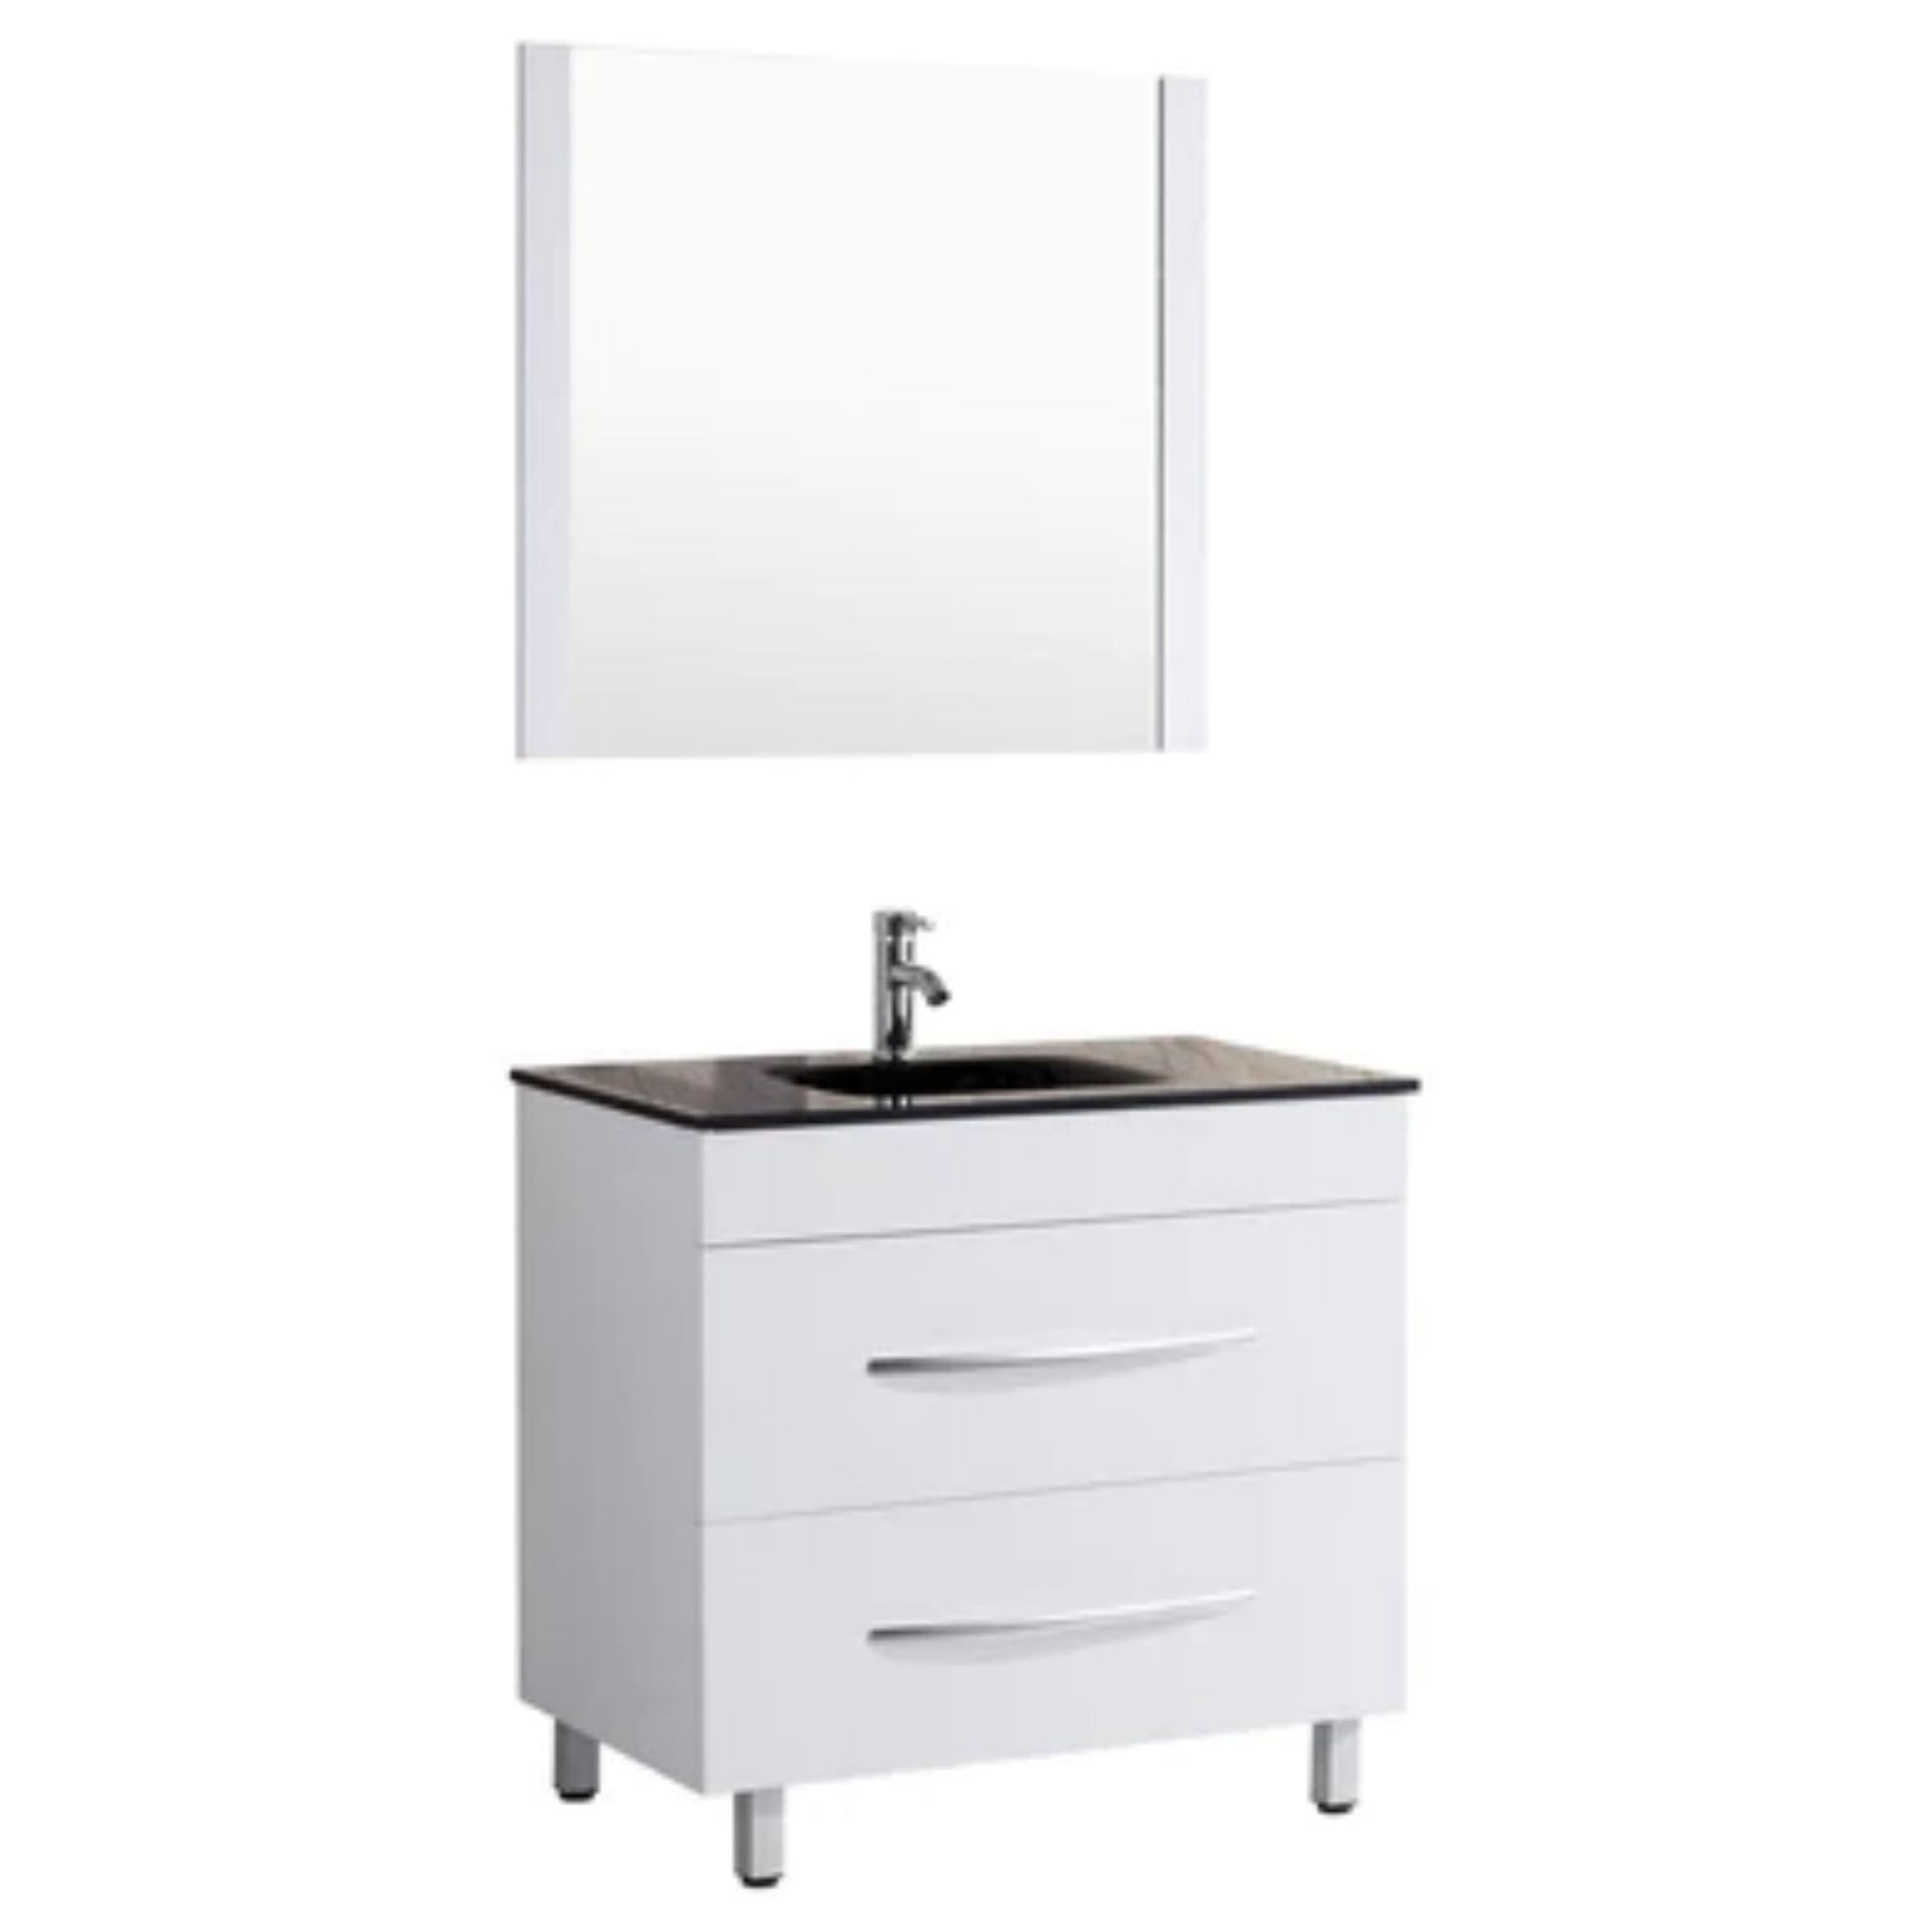 LessCare 36" White Vanity Sink Base Cabinet with Mirror - Style 4